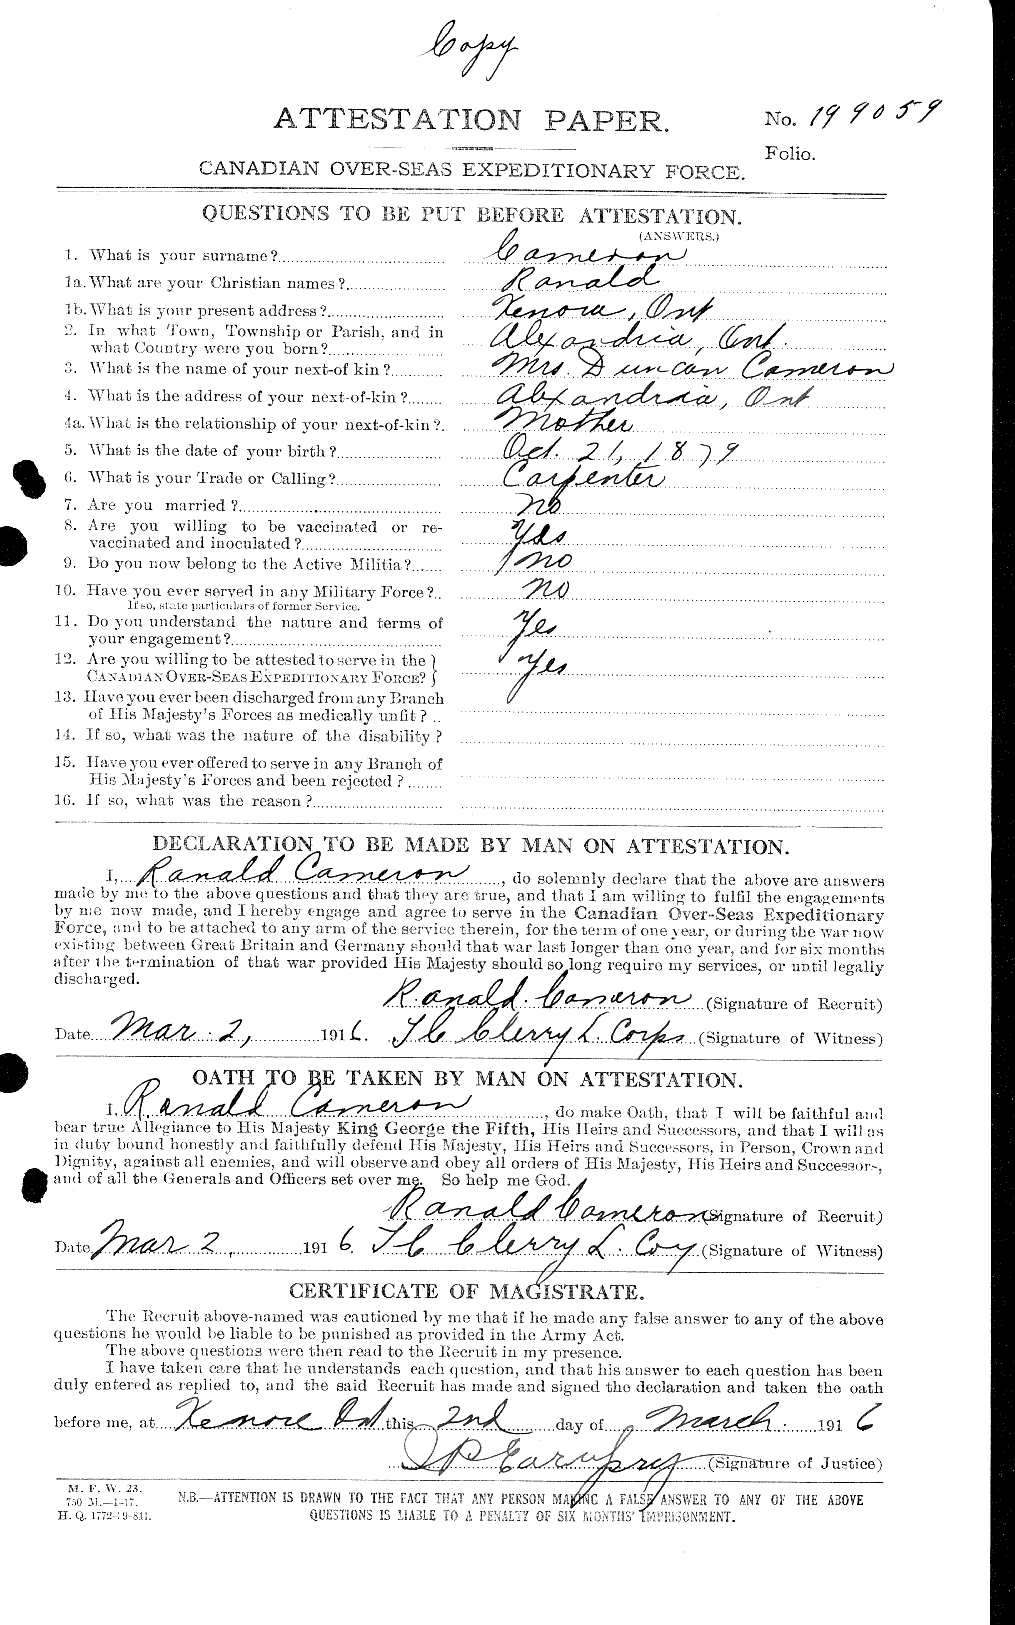 Personnel Records of the First World War - CEF 002518a